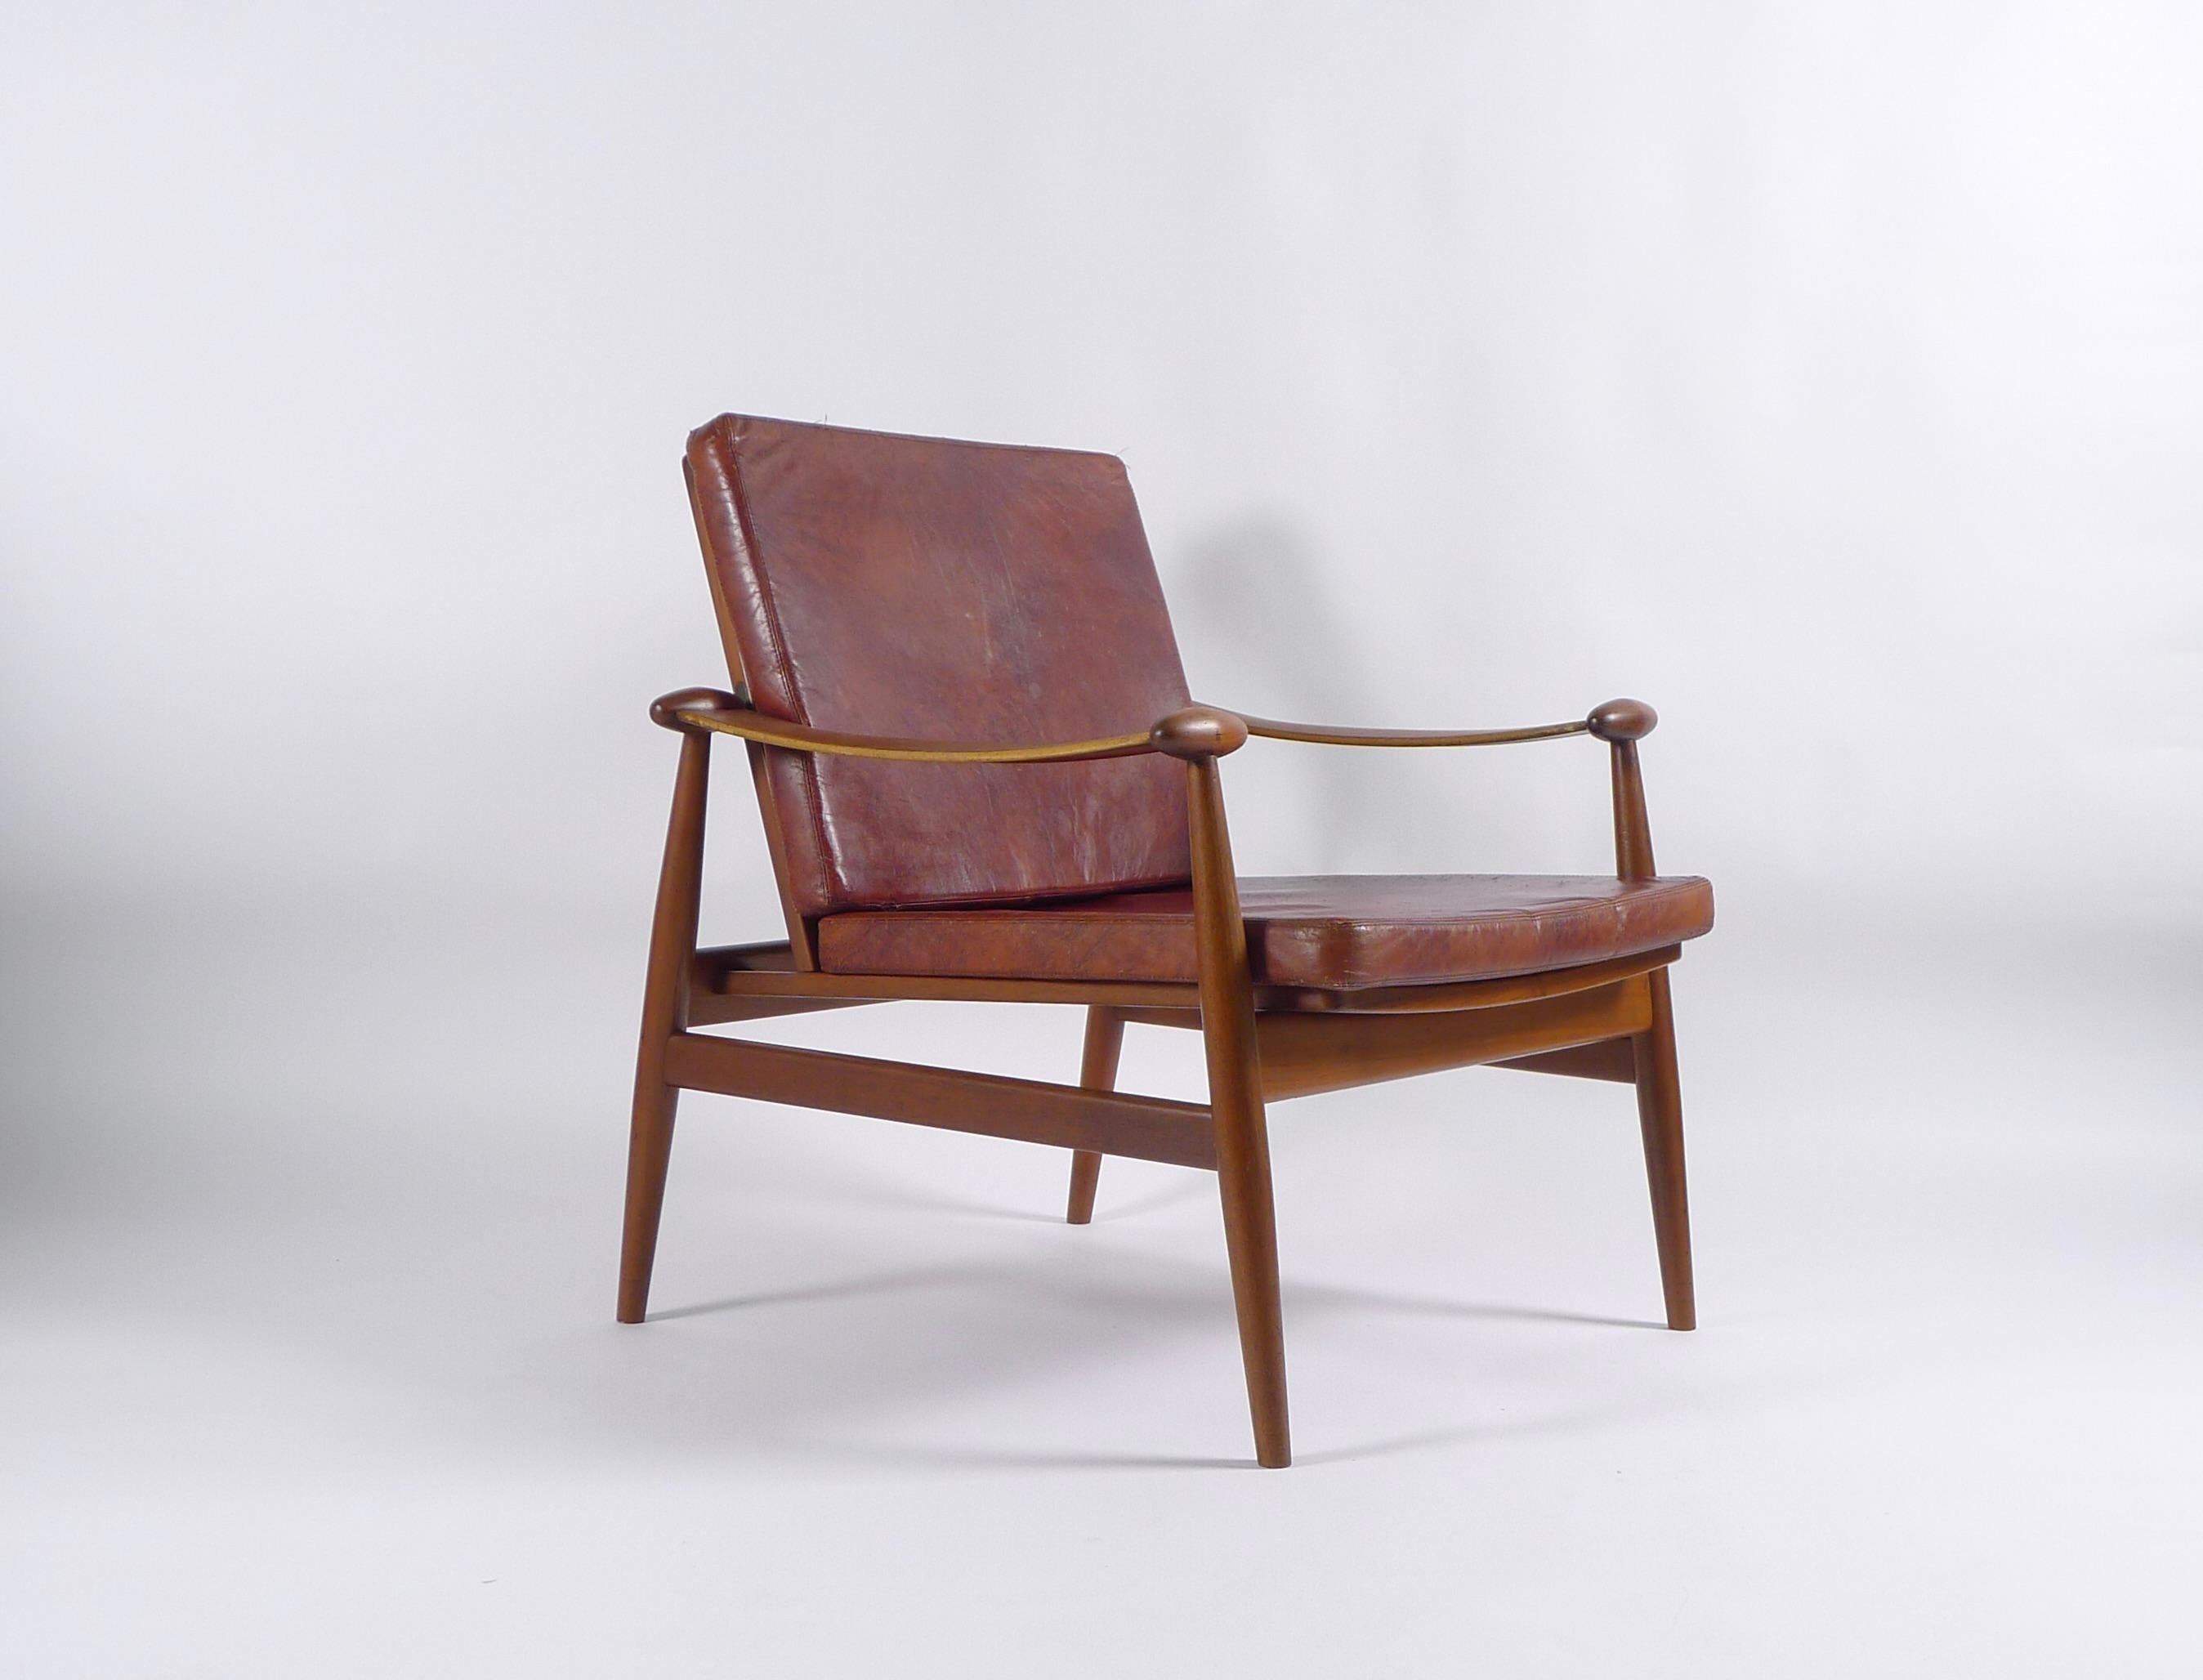 Finn Juhl Spade Chair, Model Fd133, 1950s, Produced by France & Son, with Label 2